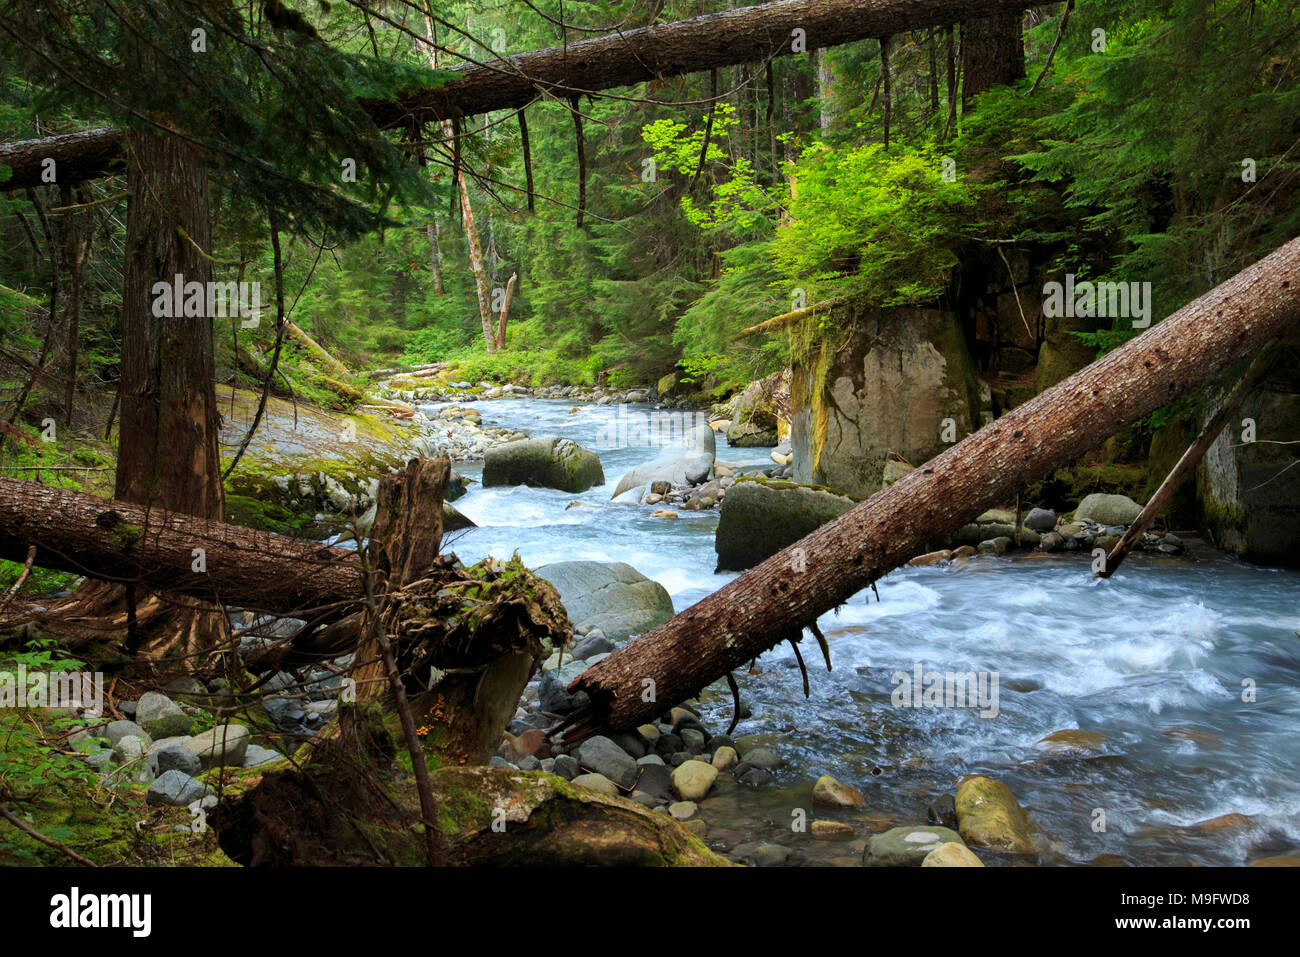 41,531.07866 secluded water and forest landscape, colorful Stevens Creek conifer forest river rapids with downed logs, rocks, boulders, cliff Stock Photo